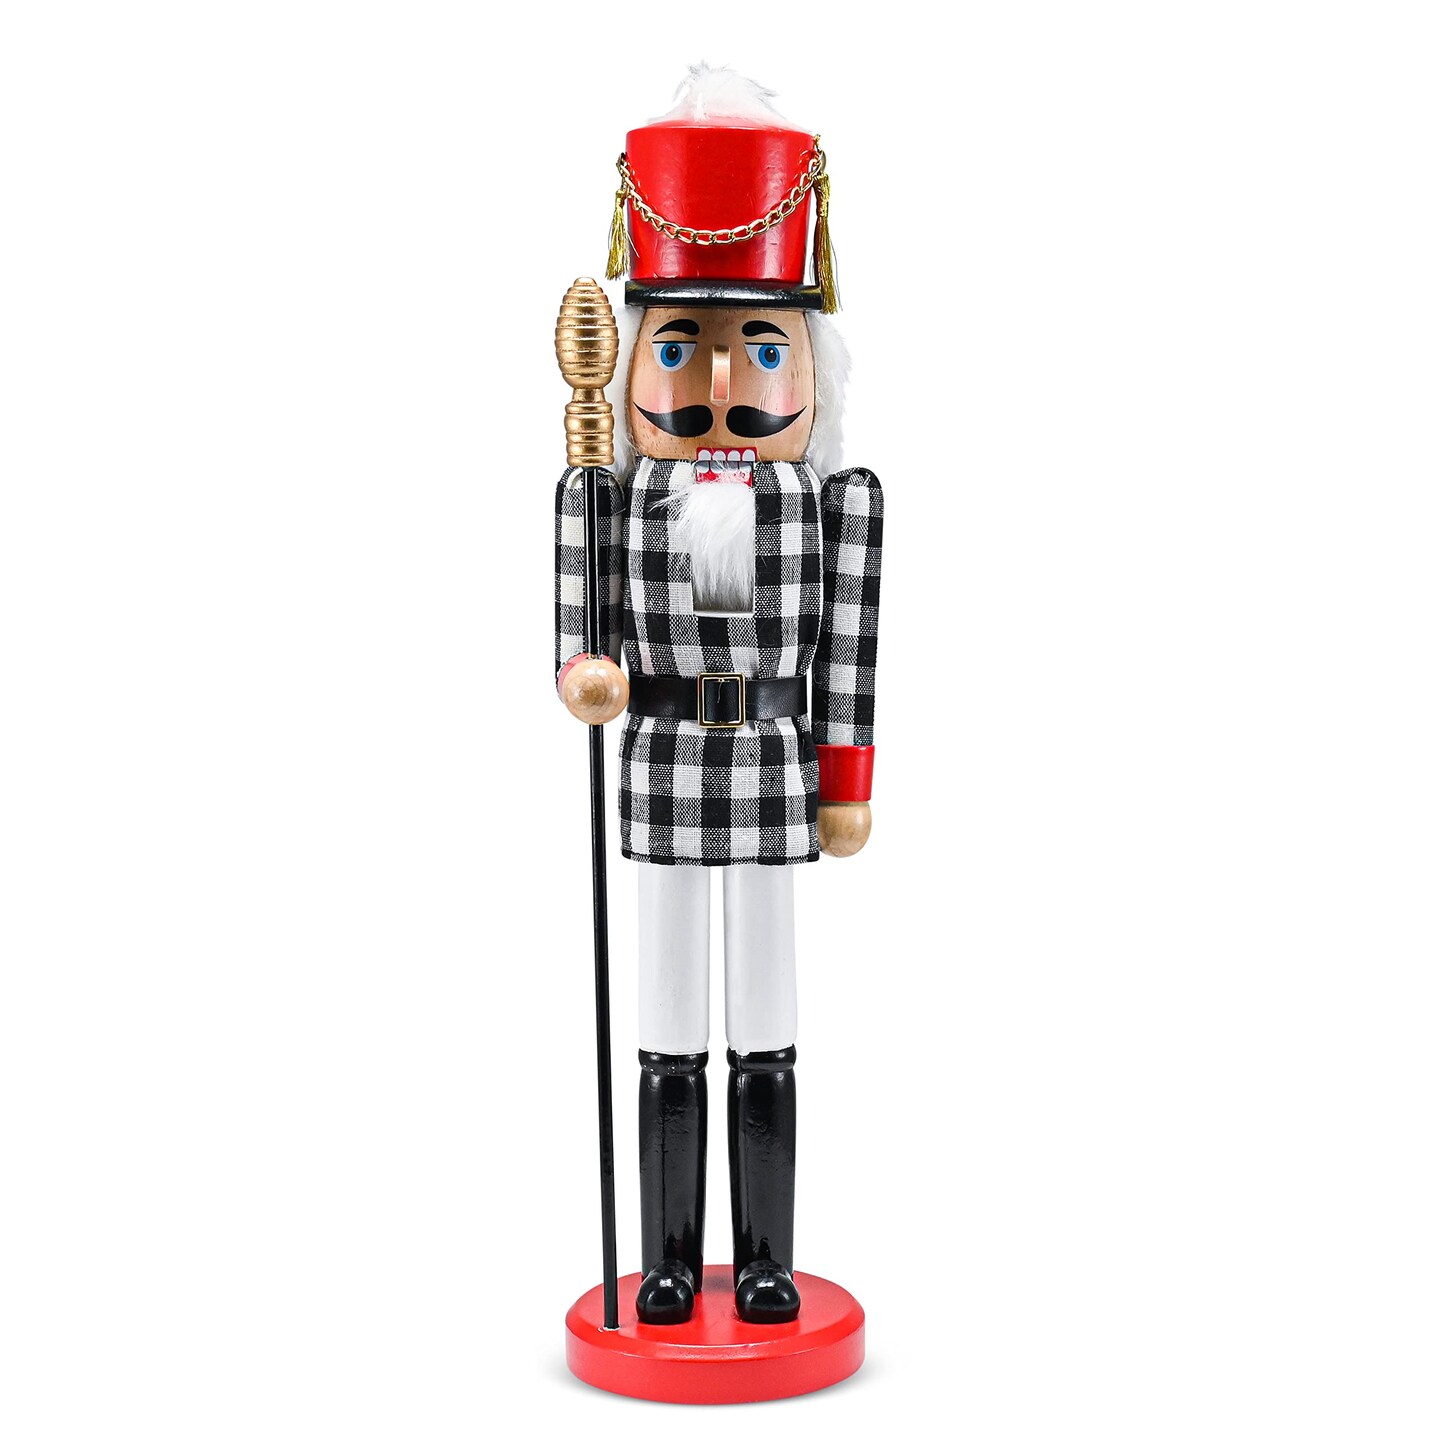 Ornativity Christmas Checkered Soldier Nutcracker &#x2013; Black and White Wooden Nutcracker Toy Soldier Knight with a Staff in Hand Xmas Themed Holiday Nut Cracker Doll Figure Decorations